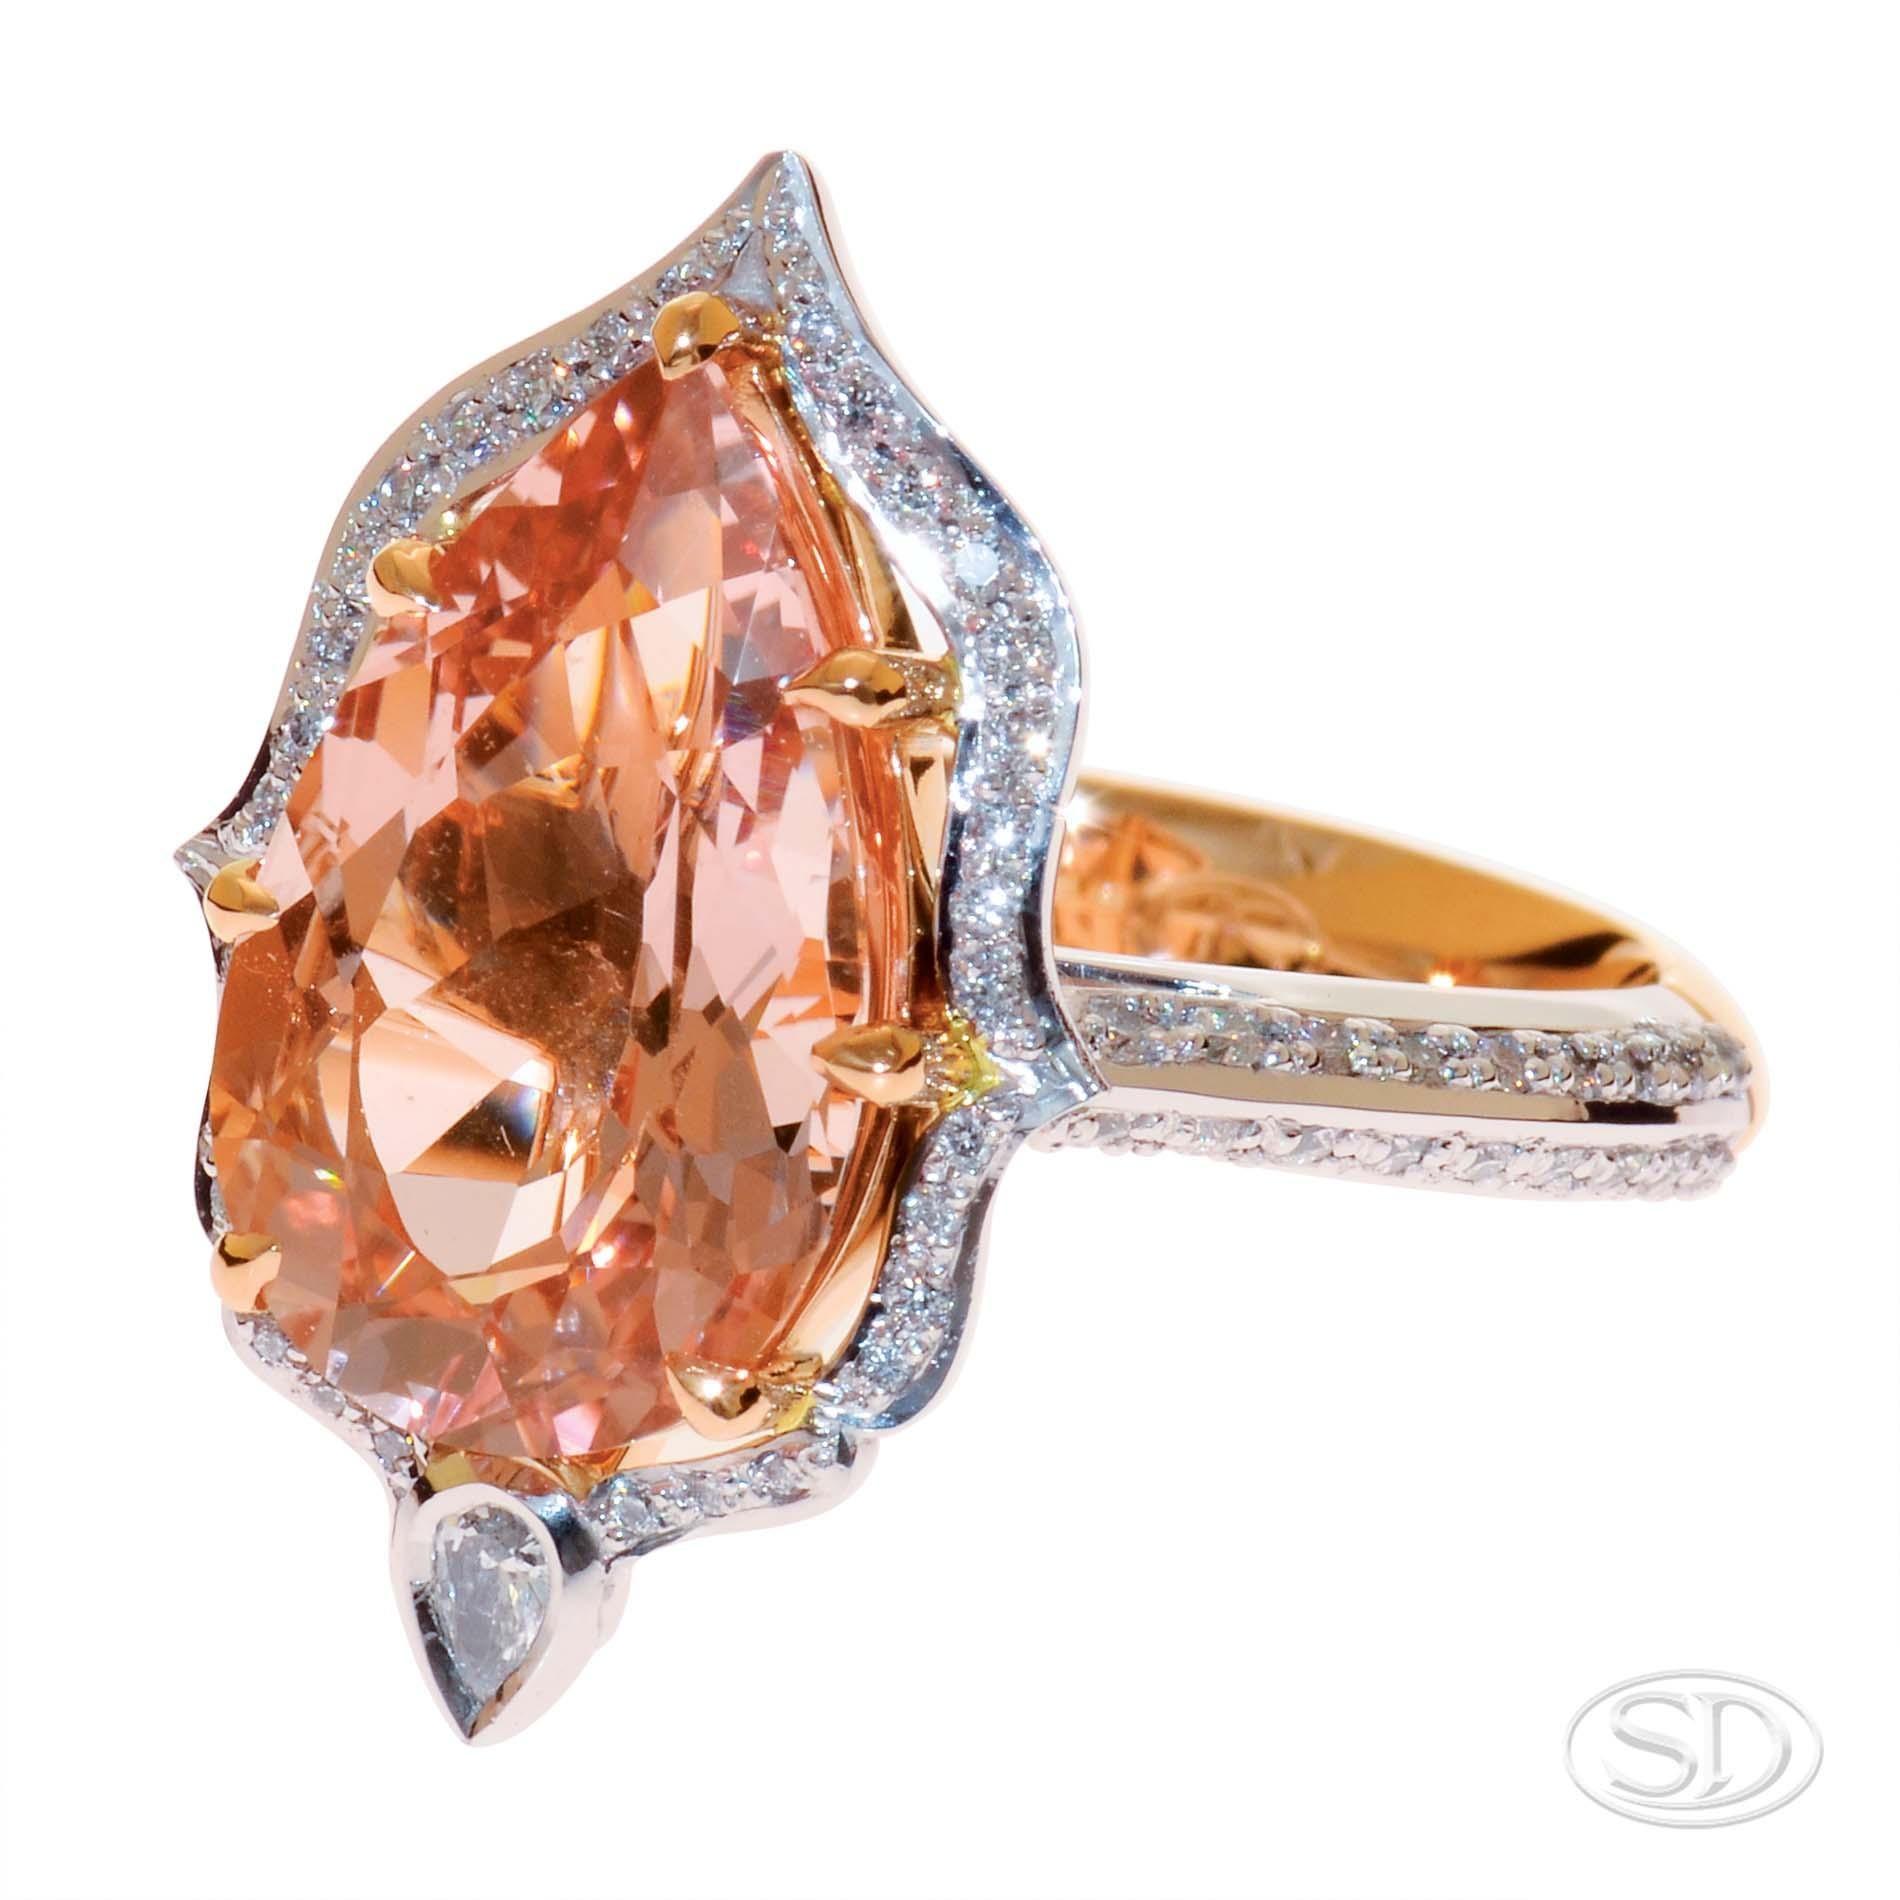 The morganite is 4.86ct and it is haloed in grain set diamonds.  This unusual shaped halo is called a fancy-shaped halo.  The band is bevelled & grain set with diamonds. There is a bezel-set 0.06ct pear shaped diamond at the base of the morganite